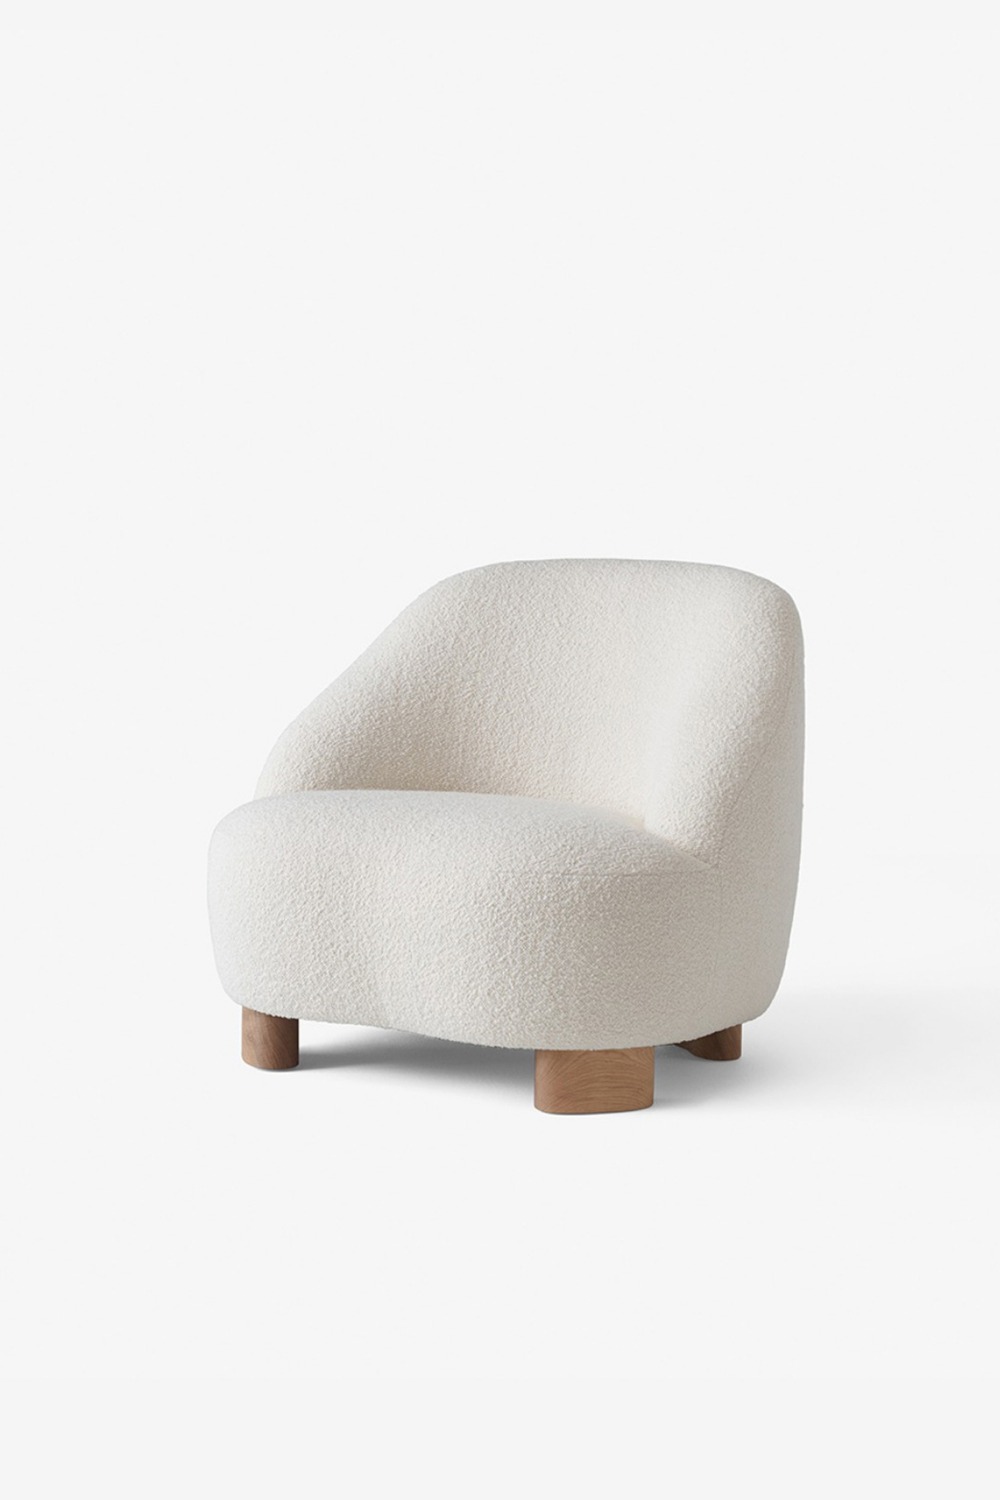 [&amp;Tradition] Margas Lounge Chair / LC1